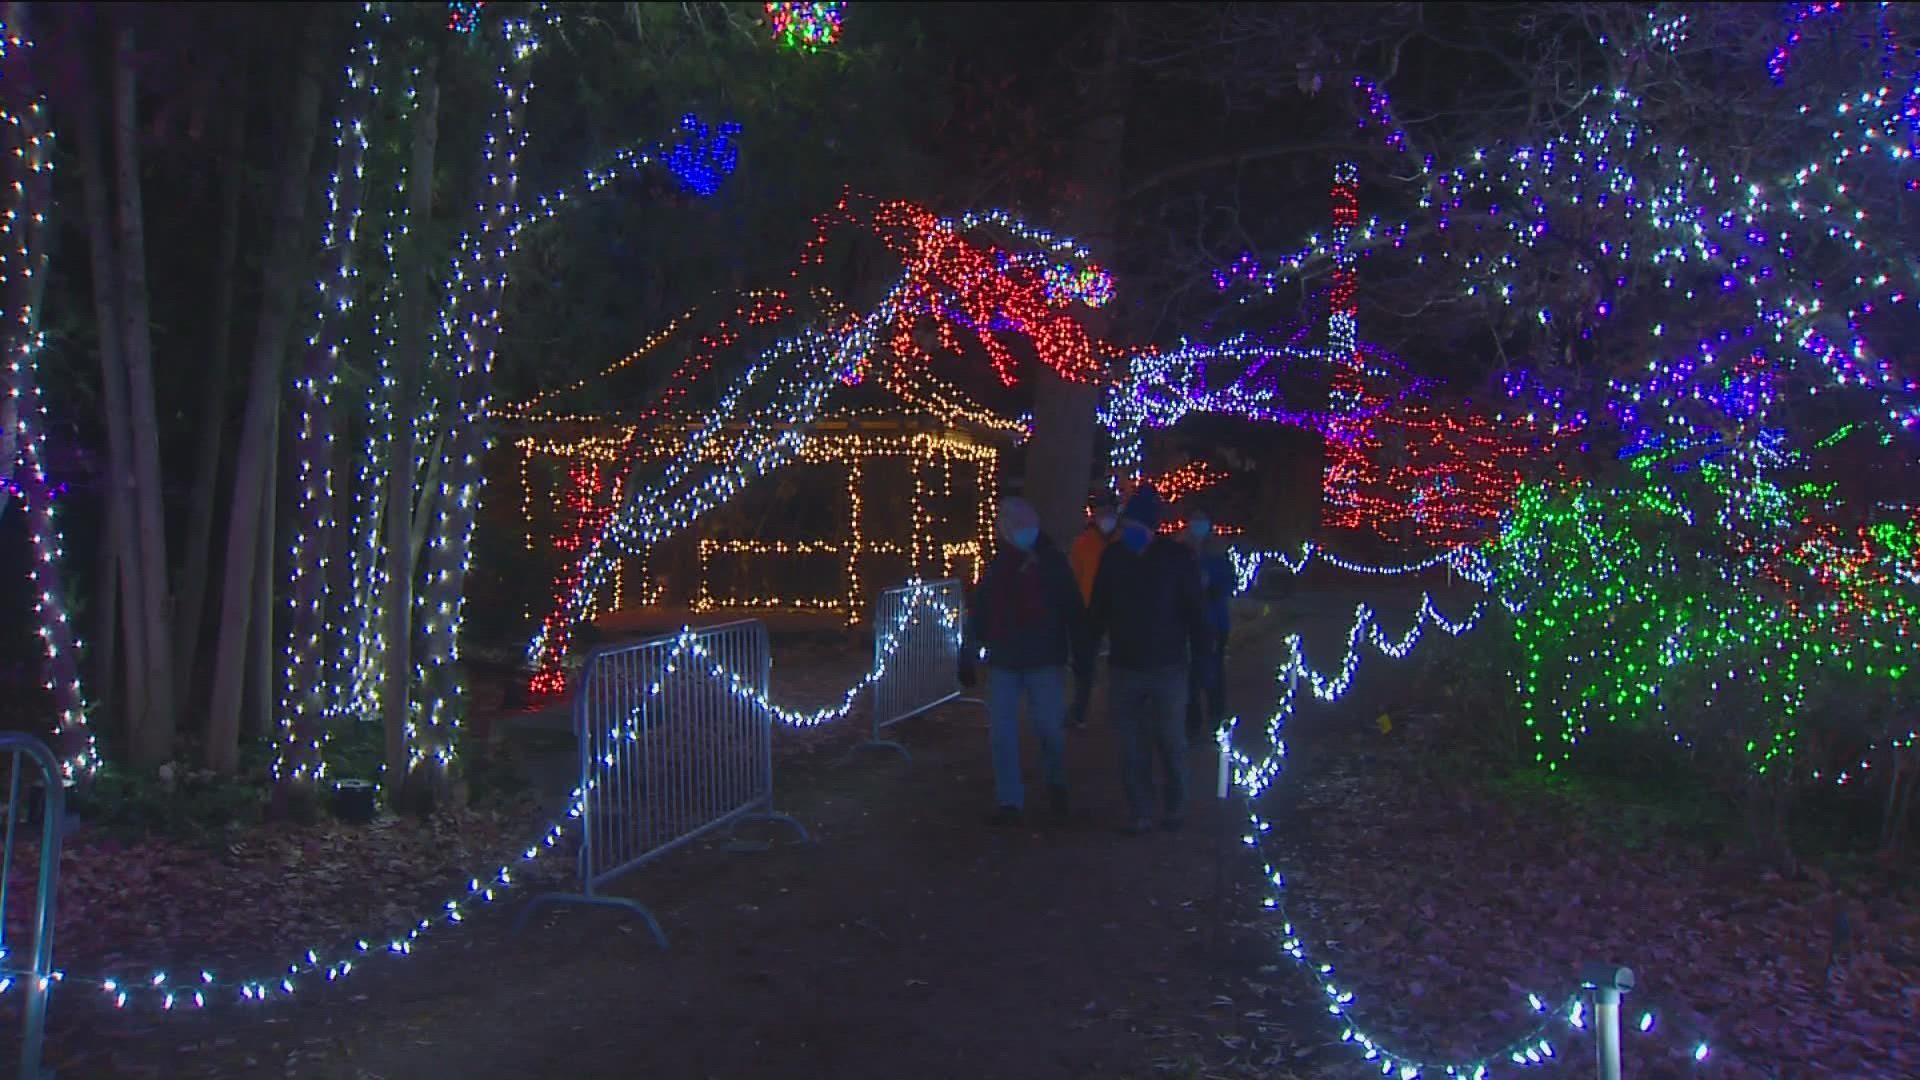 'Pride Night at Winter Garden aGlow' at the Idaho Botanical Garden is billed as a family-friendly event, but some Idaho groups are encouraging protesting the event.